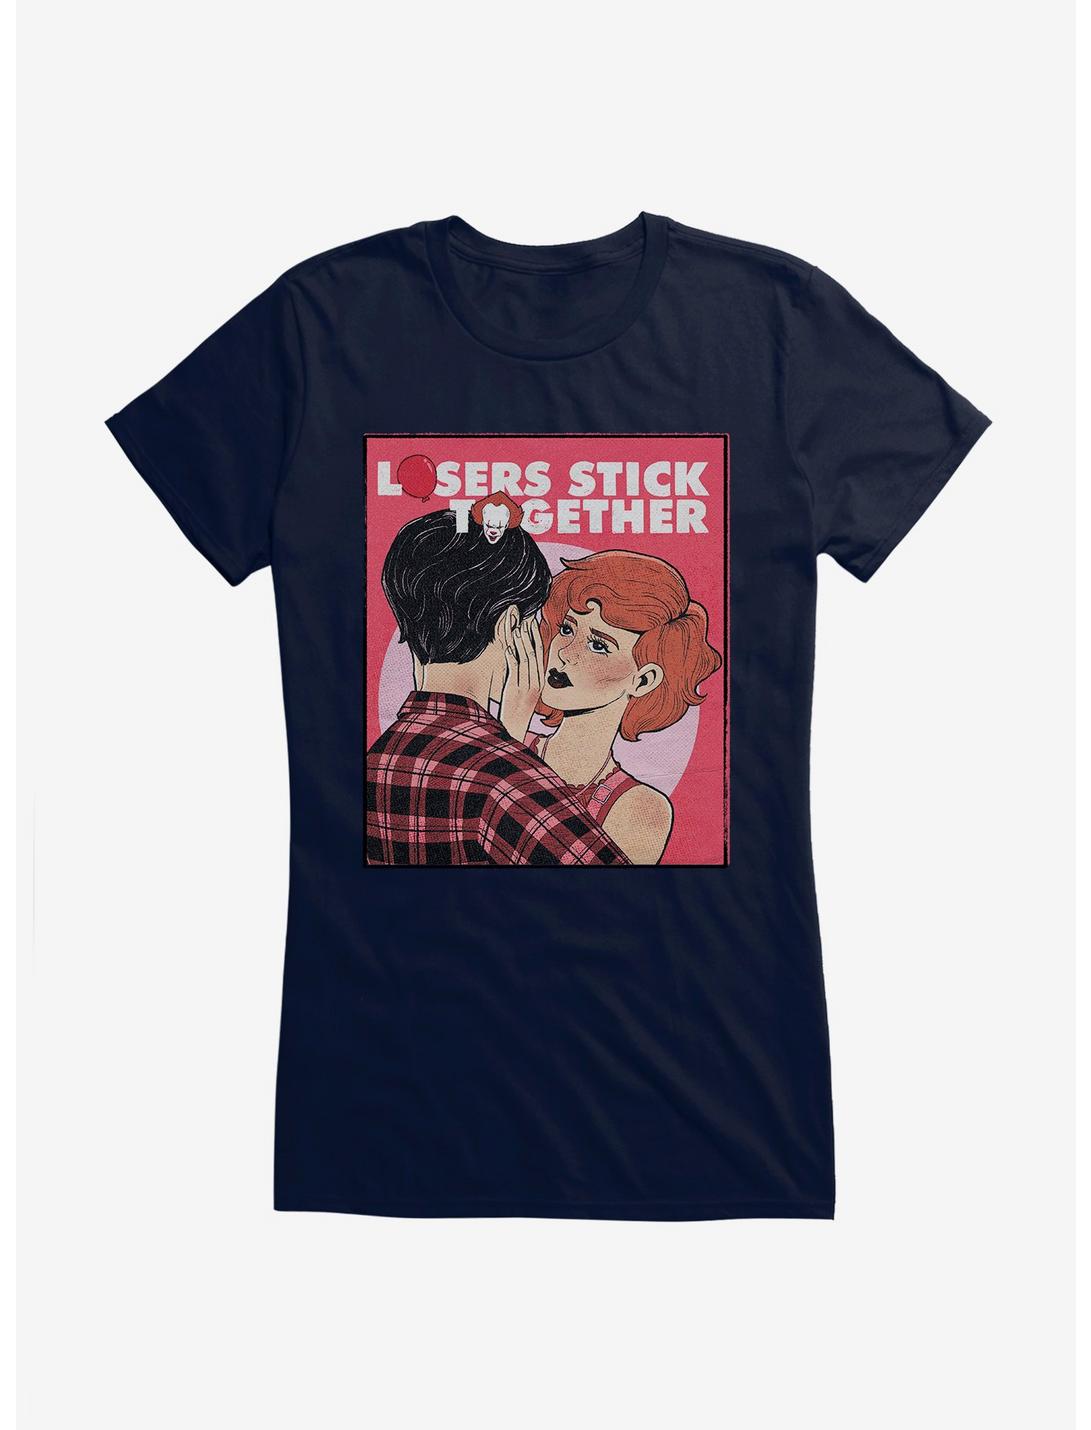 IT2 Losers Stick Together Girls T-Shirt, NAVY, hi-res